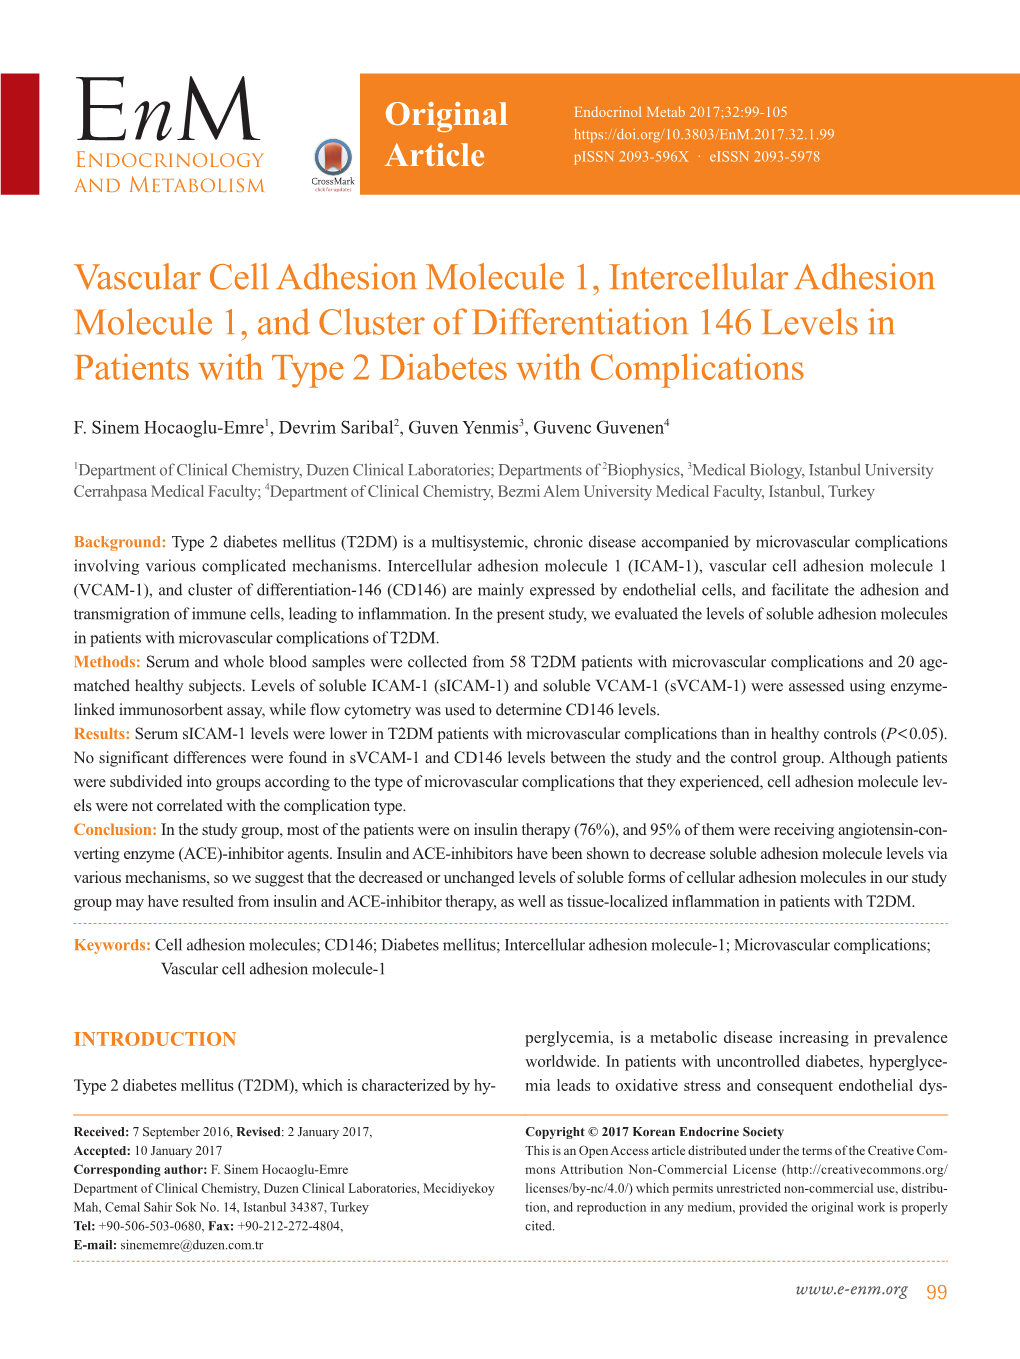 Vascular Cell Adhesion Molecule 1, Intercellular Adhesion Molecule 1, and Cluster of Differentiation 146 Levels in Patients with Type 2 Diabetes with Complications